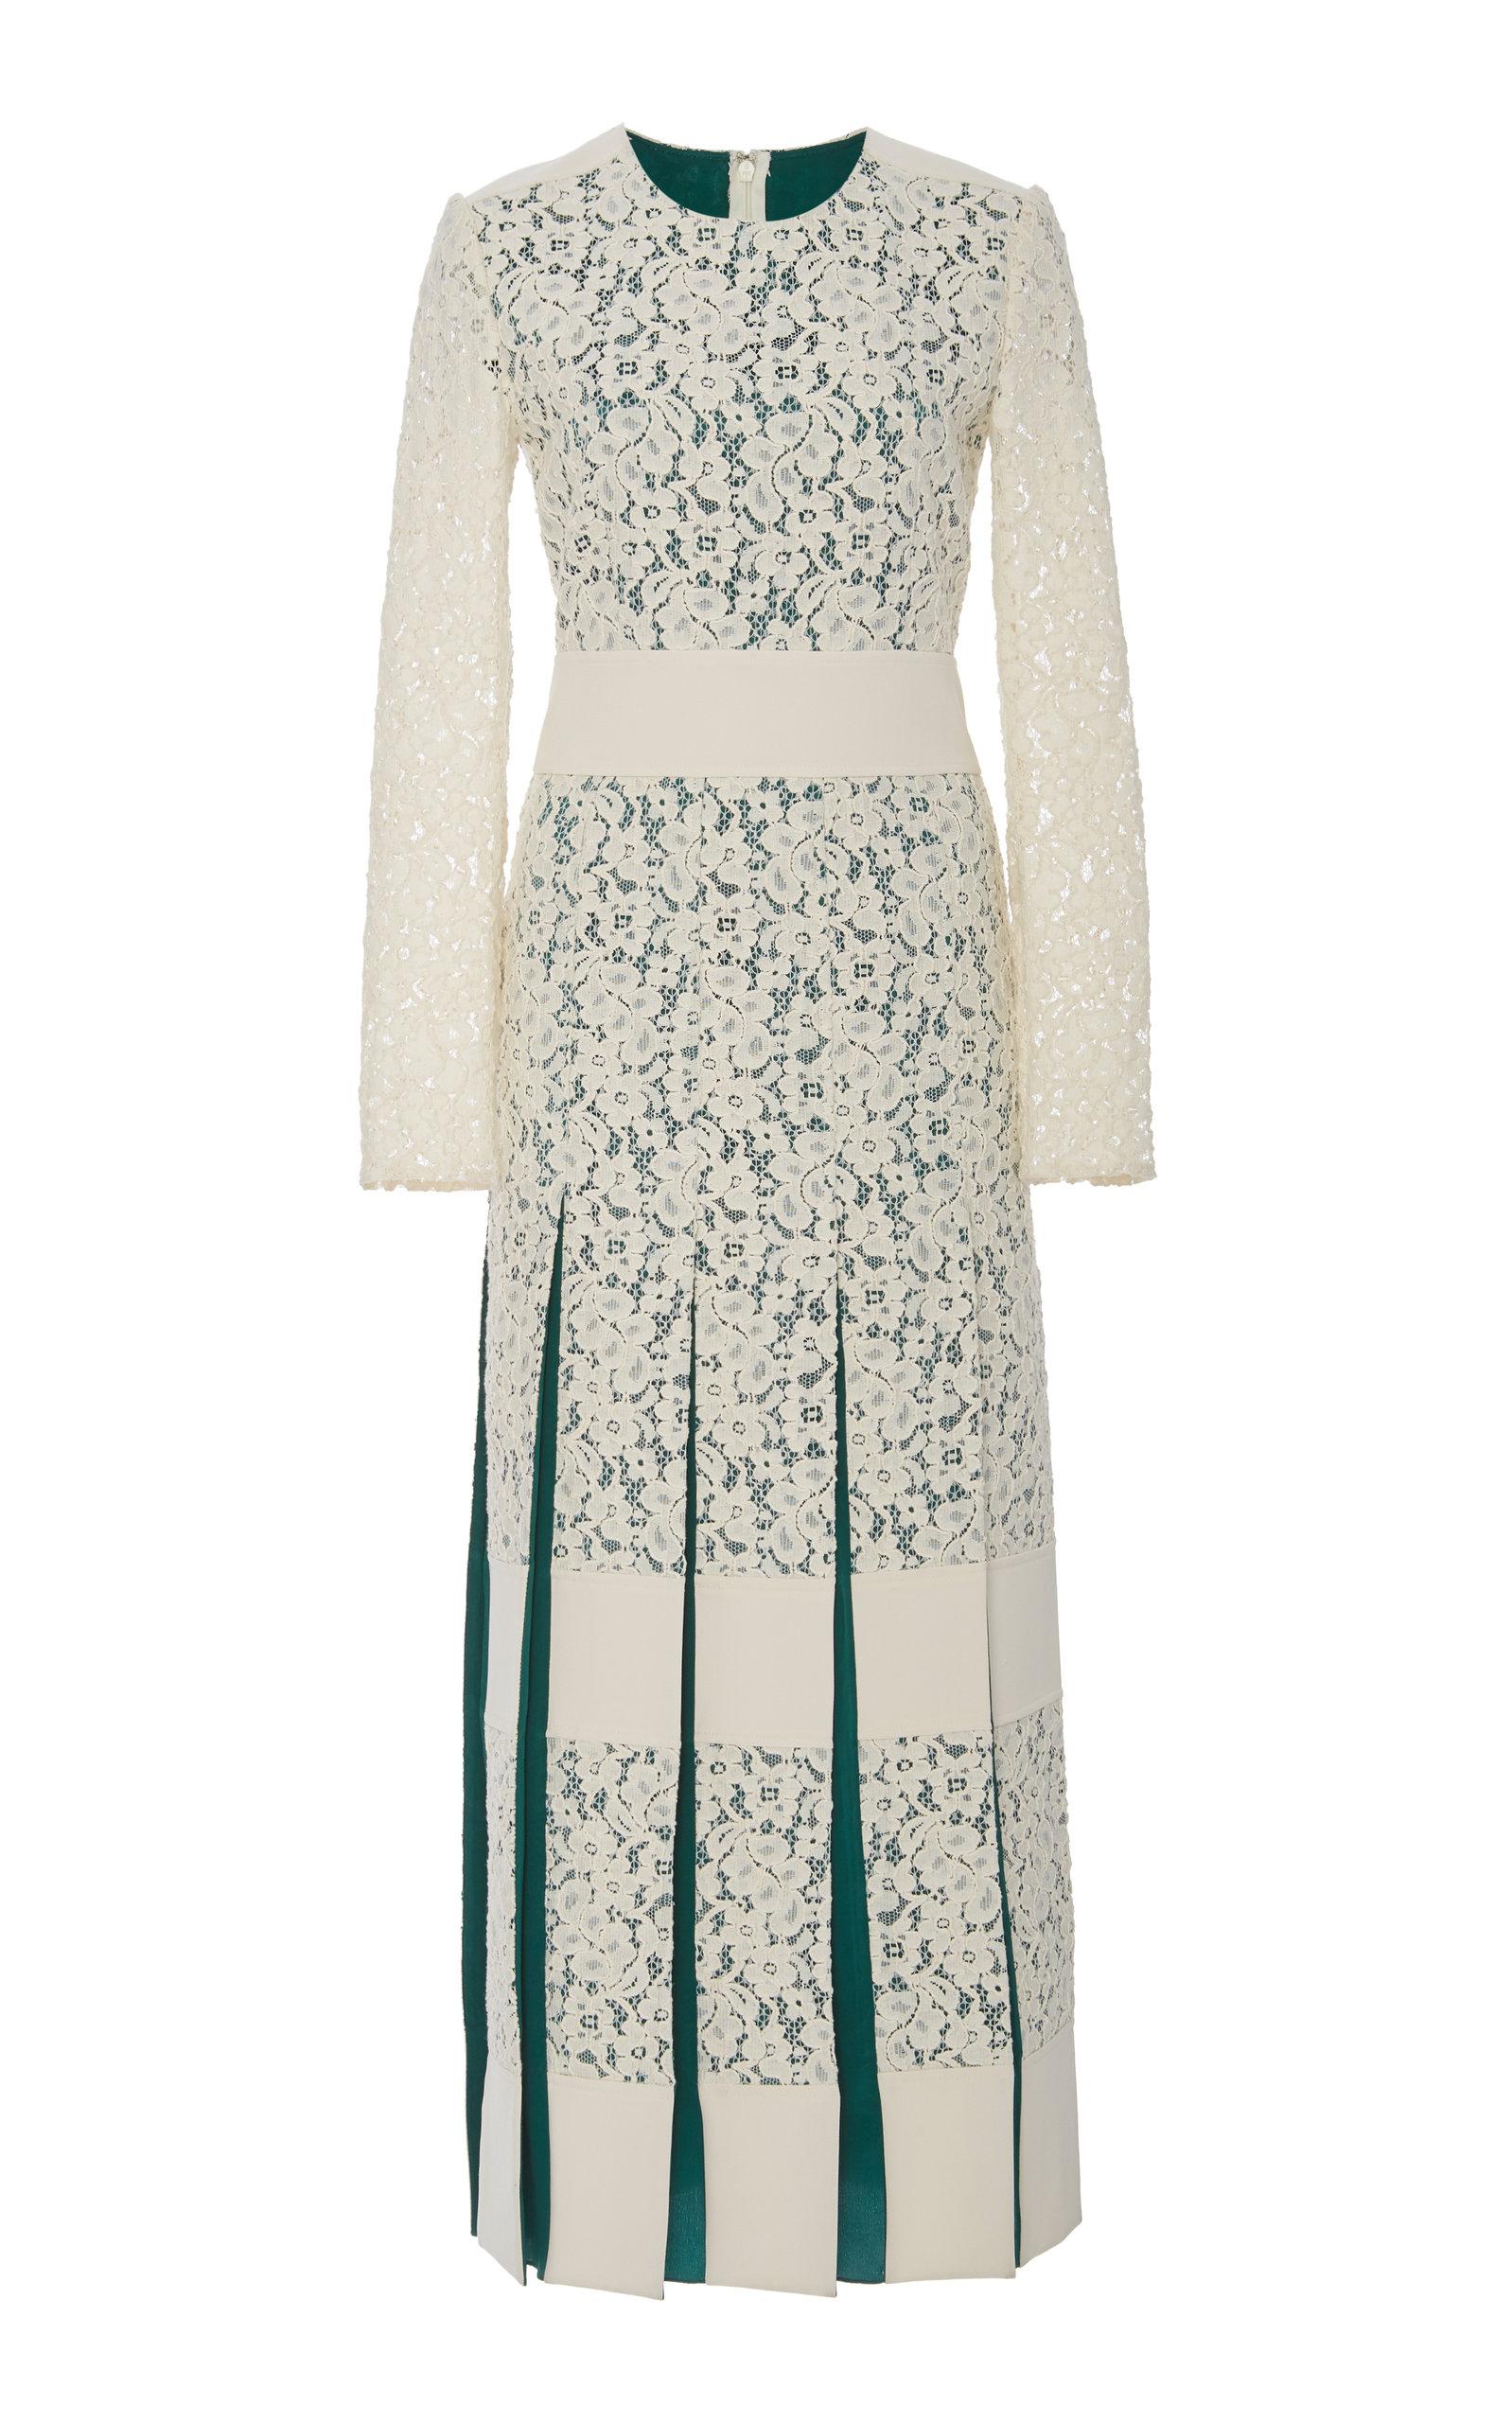 Tory Burch Floral-embroidered Lace Cotton Dress in White - Lyst